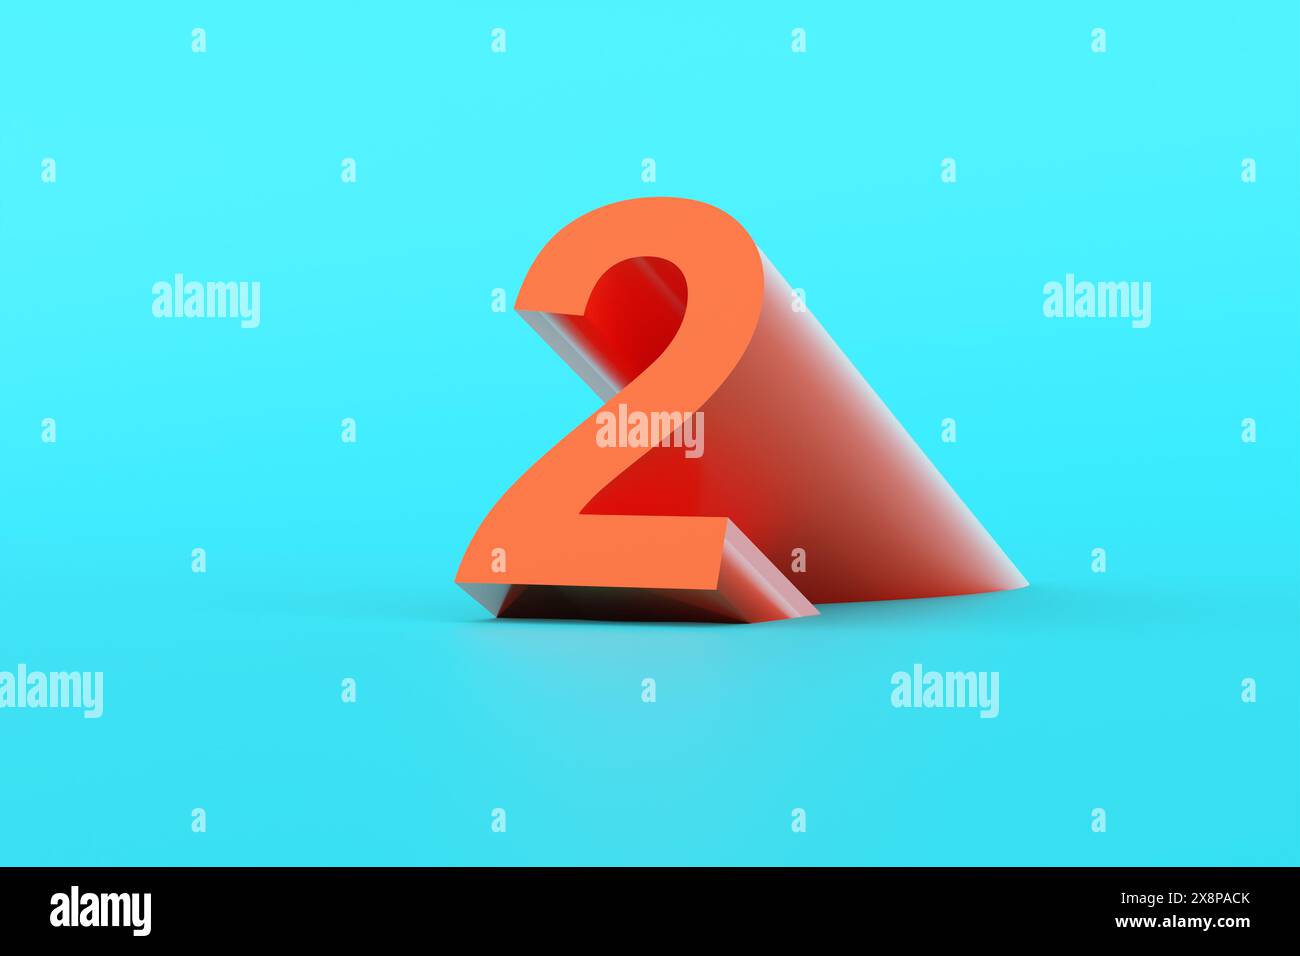 Orange colored number two on blue background. 3D rendered numbers for banner, logo design and templates. Stock Photo